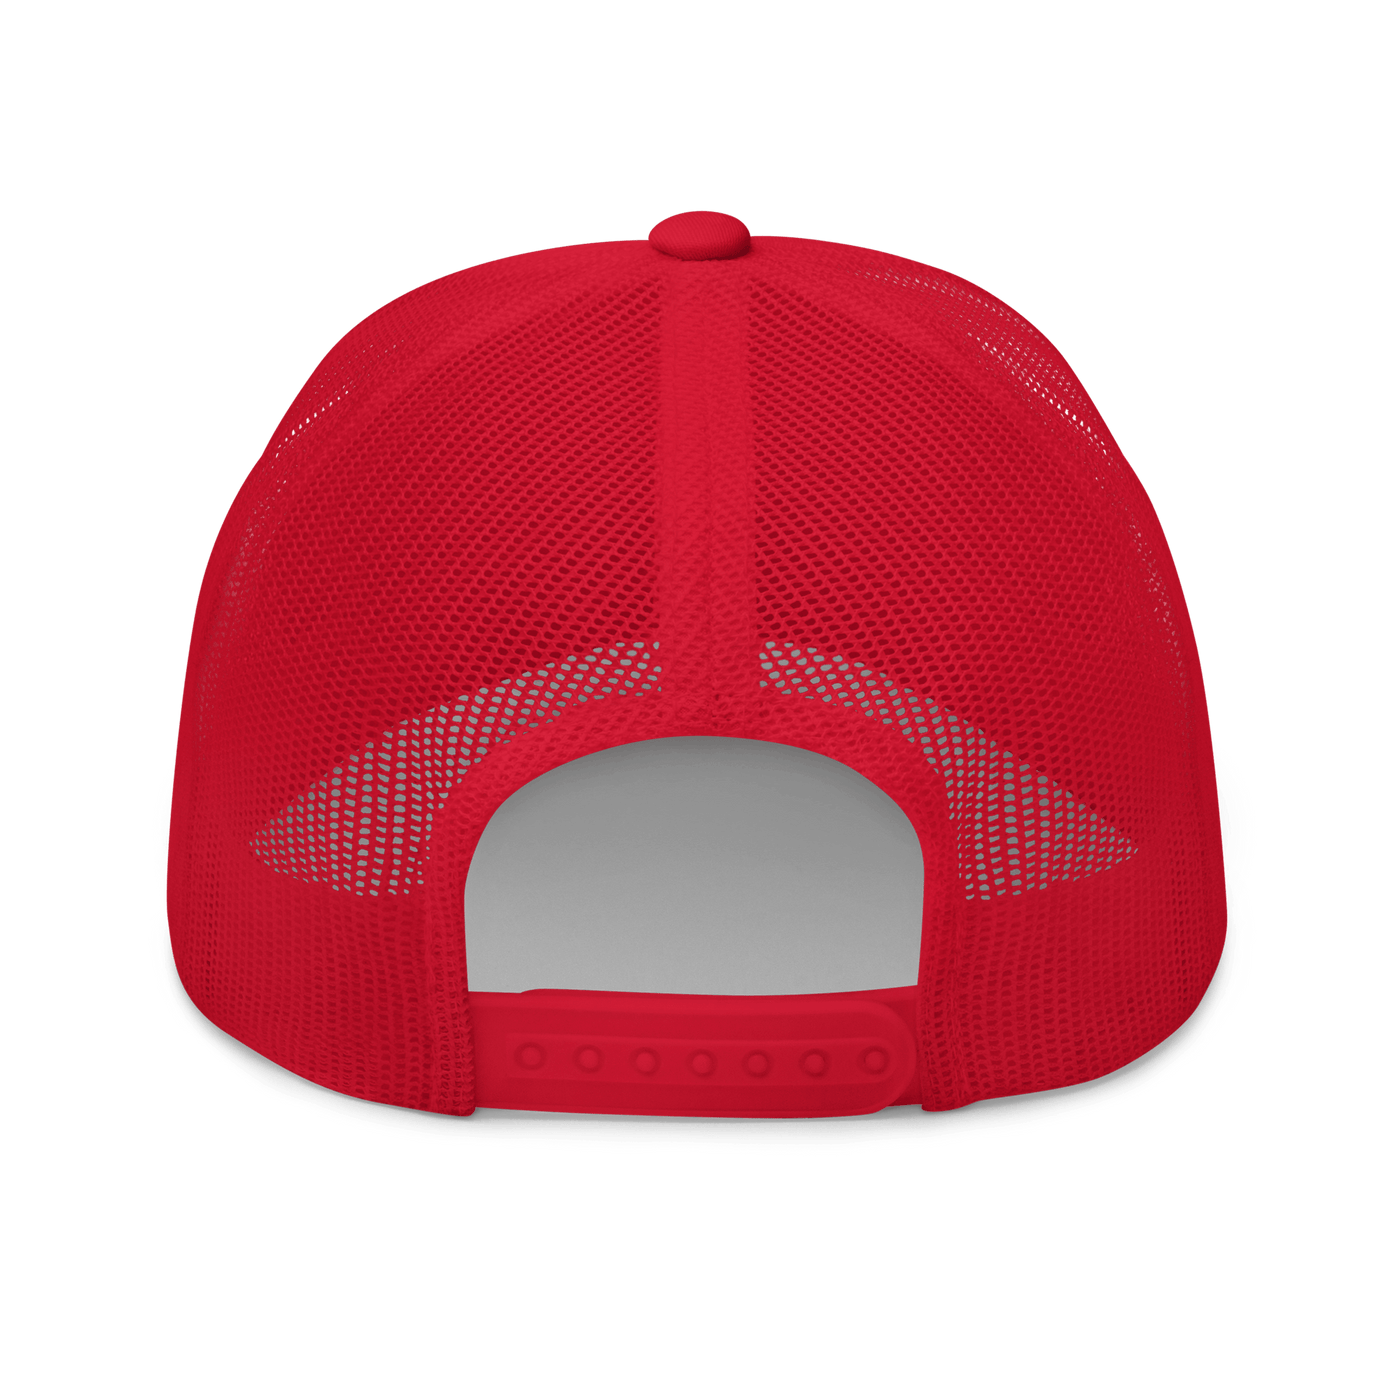 Lonely Duck Trucker Cap - Red - - Just Another Cap Store